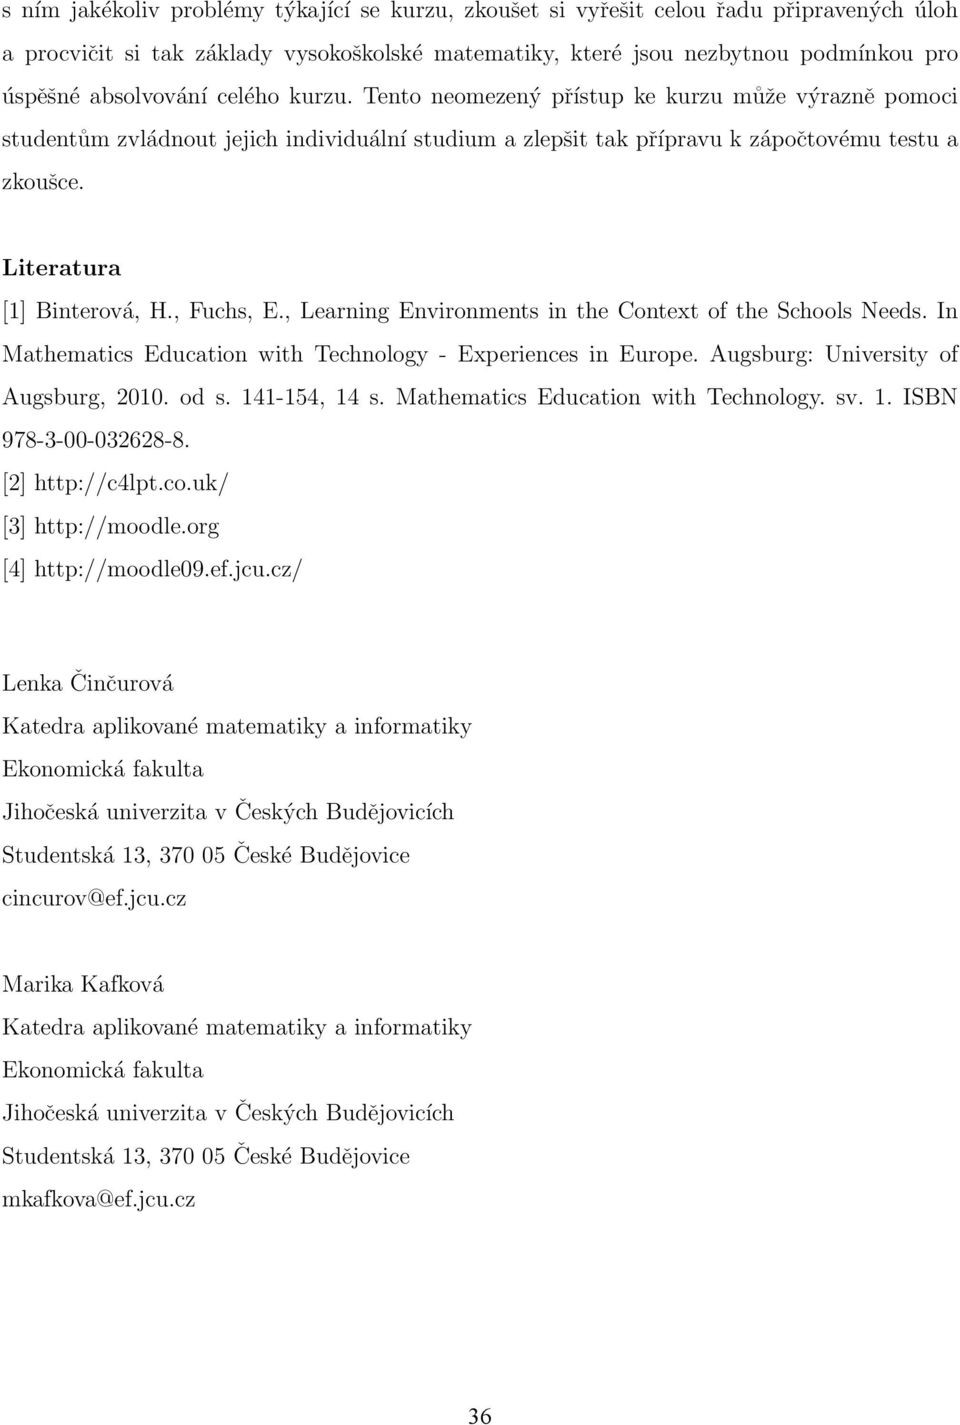 , Fuchs, E., Learning Environments in the Context of the Schools Needs. In Mathematics Education with Technology - Experiences in Europe. Augsburg: University of Augsburg, 2010. od s. 141-154, 14 s.